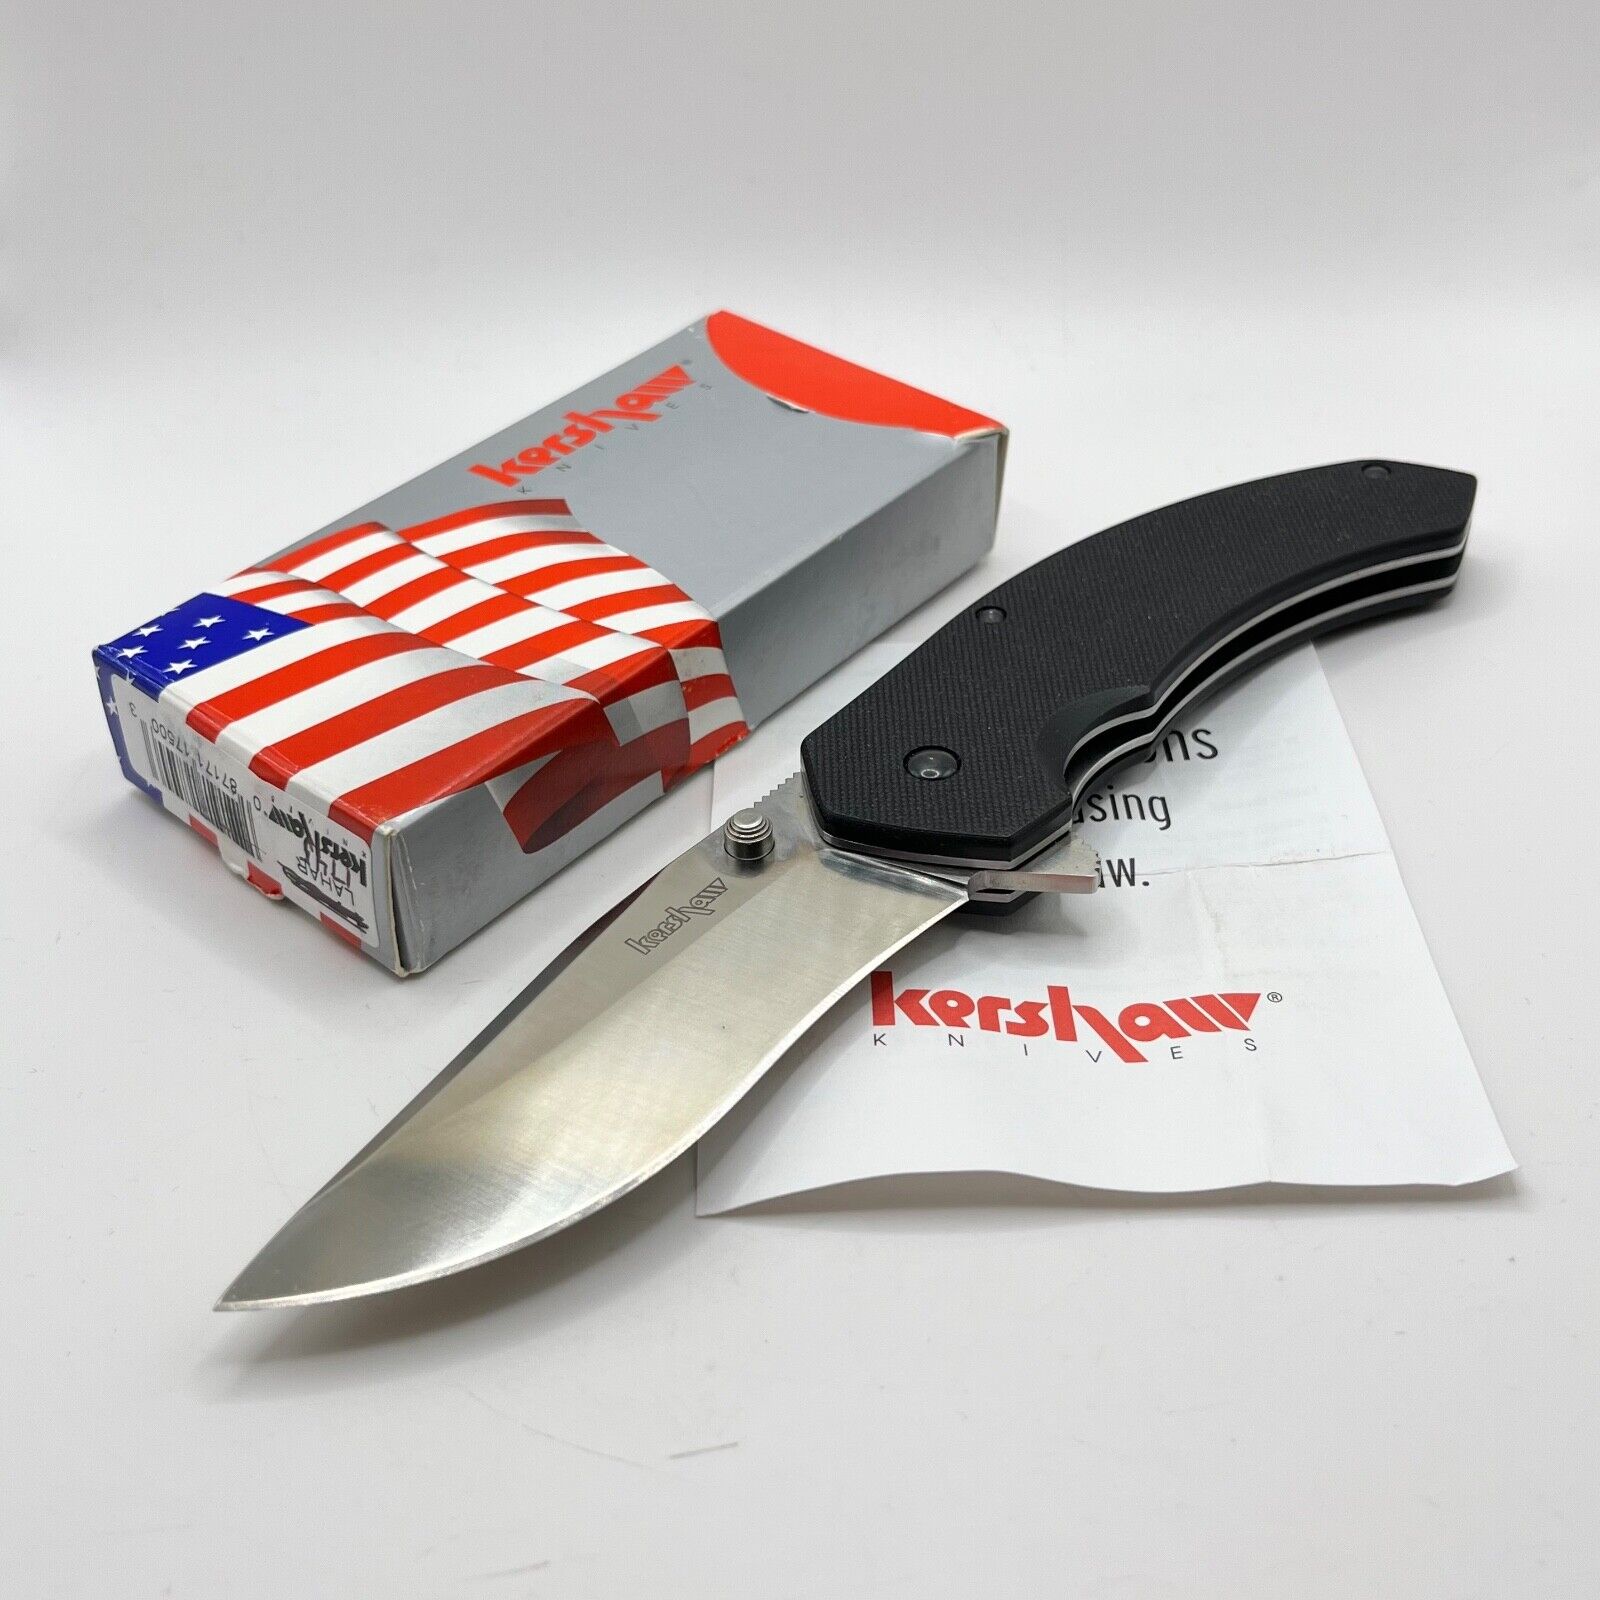 Kershaw Lahar 1750 - 1745 Rare Discontinued Knife - FACTORY ERROR Collectible